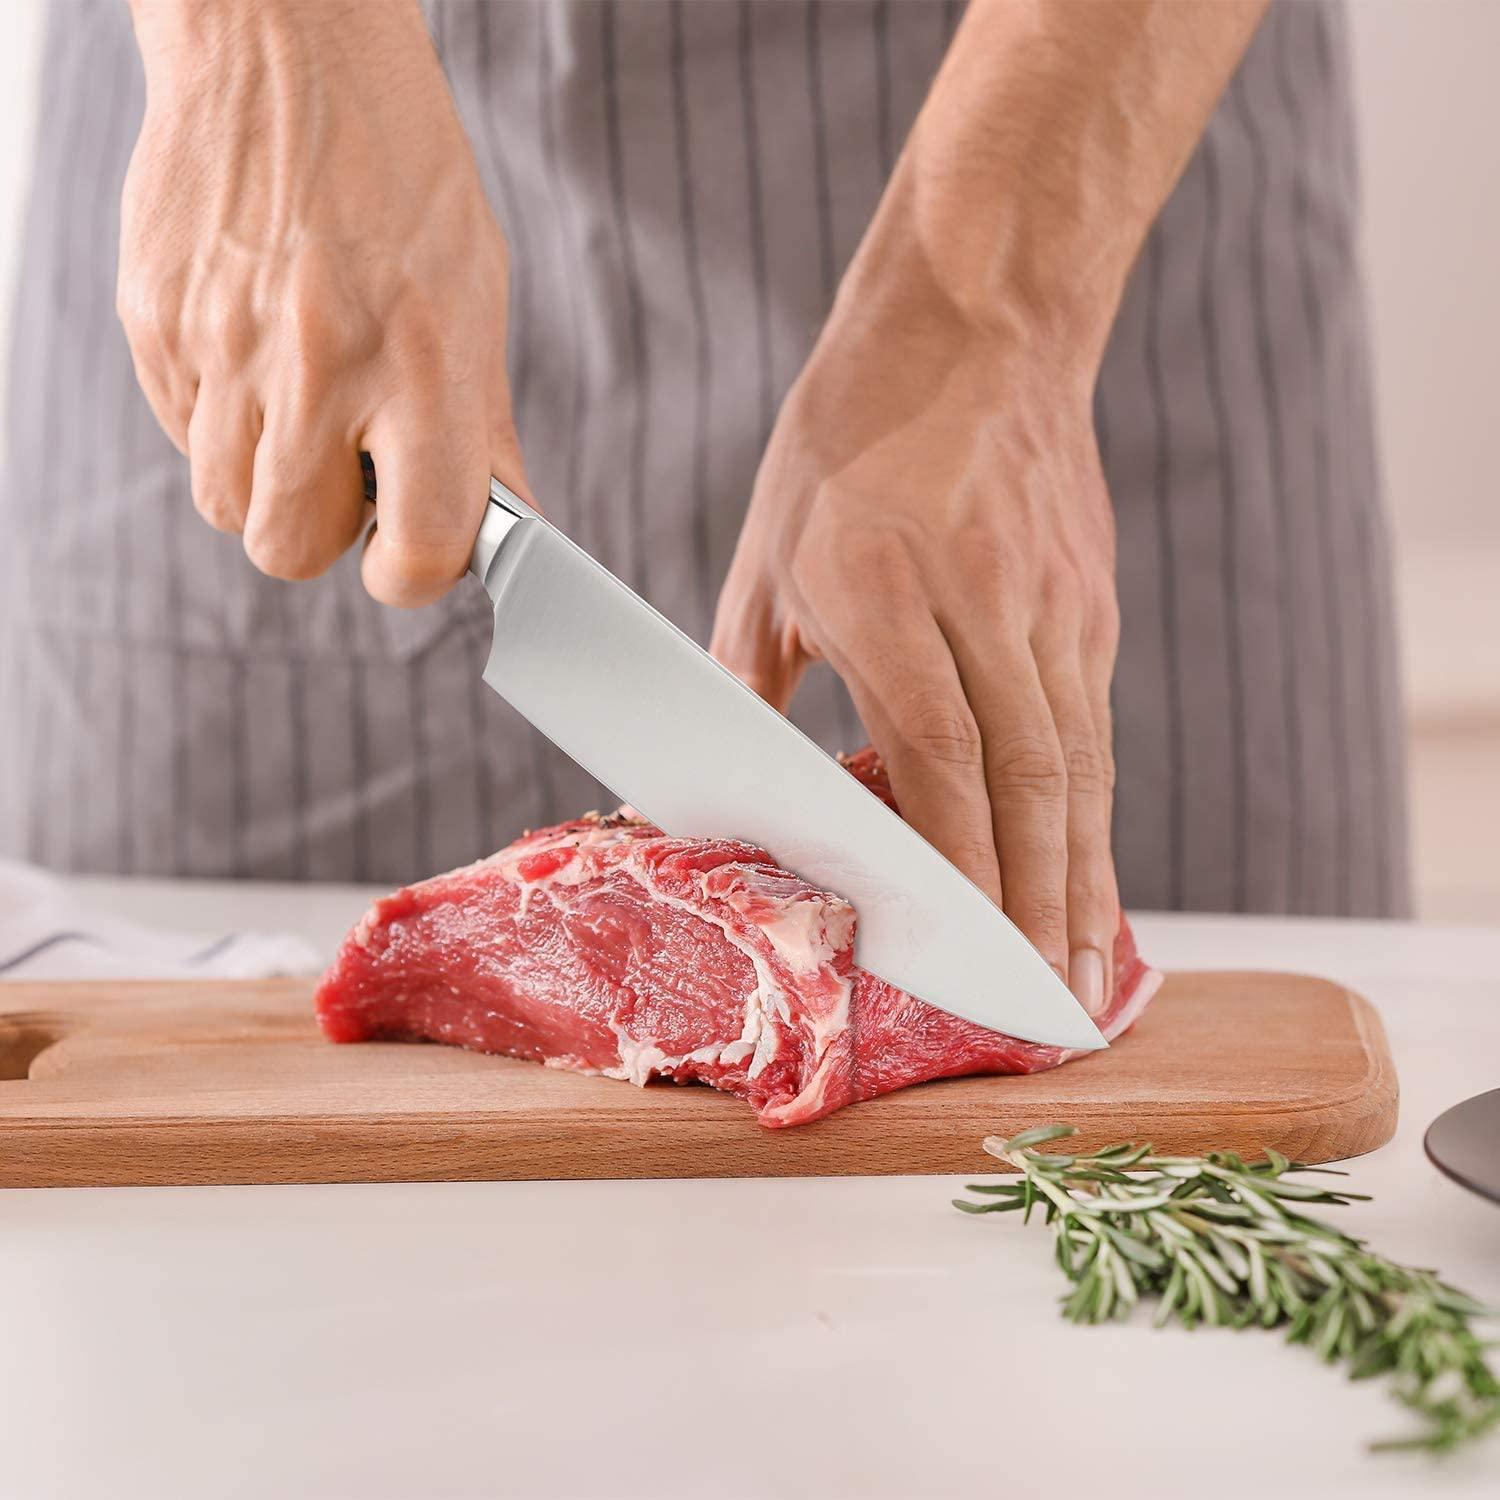 The Benefits Of Buying A Good Quality Chef's Knife - IMARKU